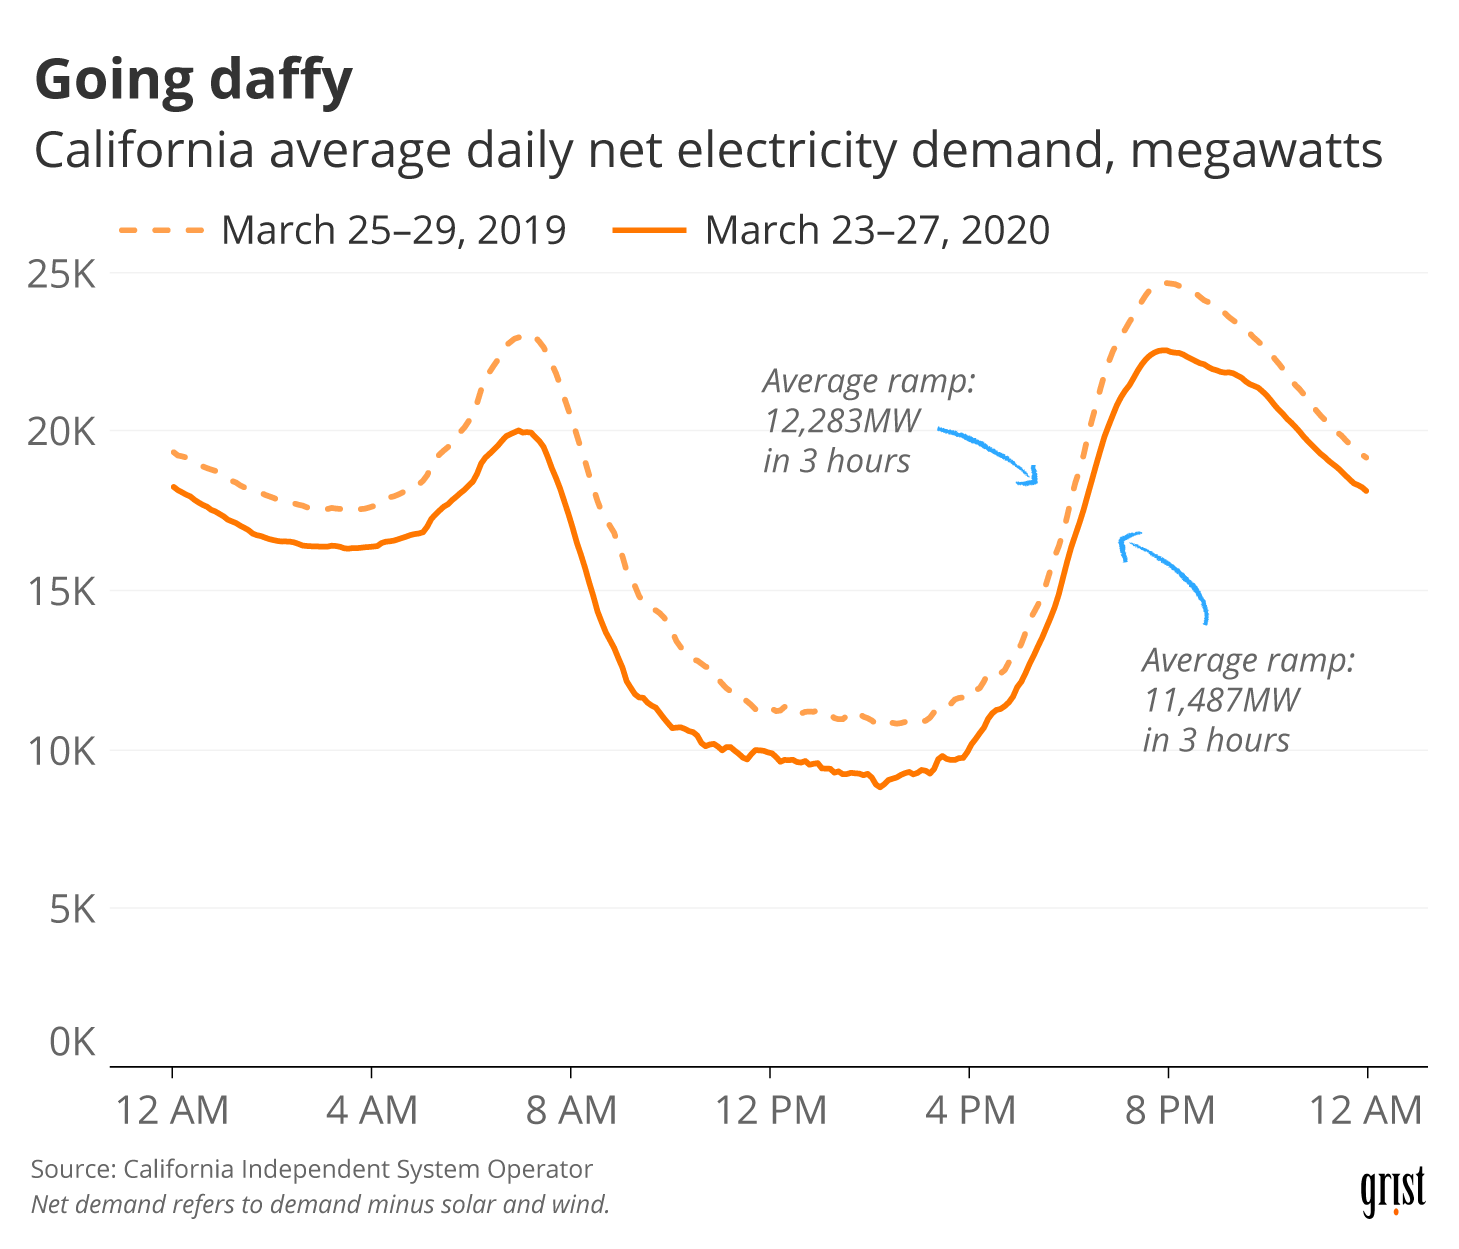 A line chart showing California average daily net electricity demand in late March 2020 versus late March 2019. In 2020, demand was lower, and it ramped to peak more slowly.